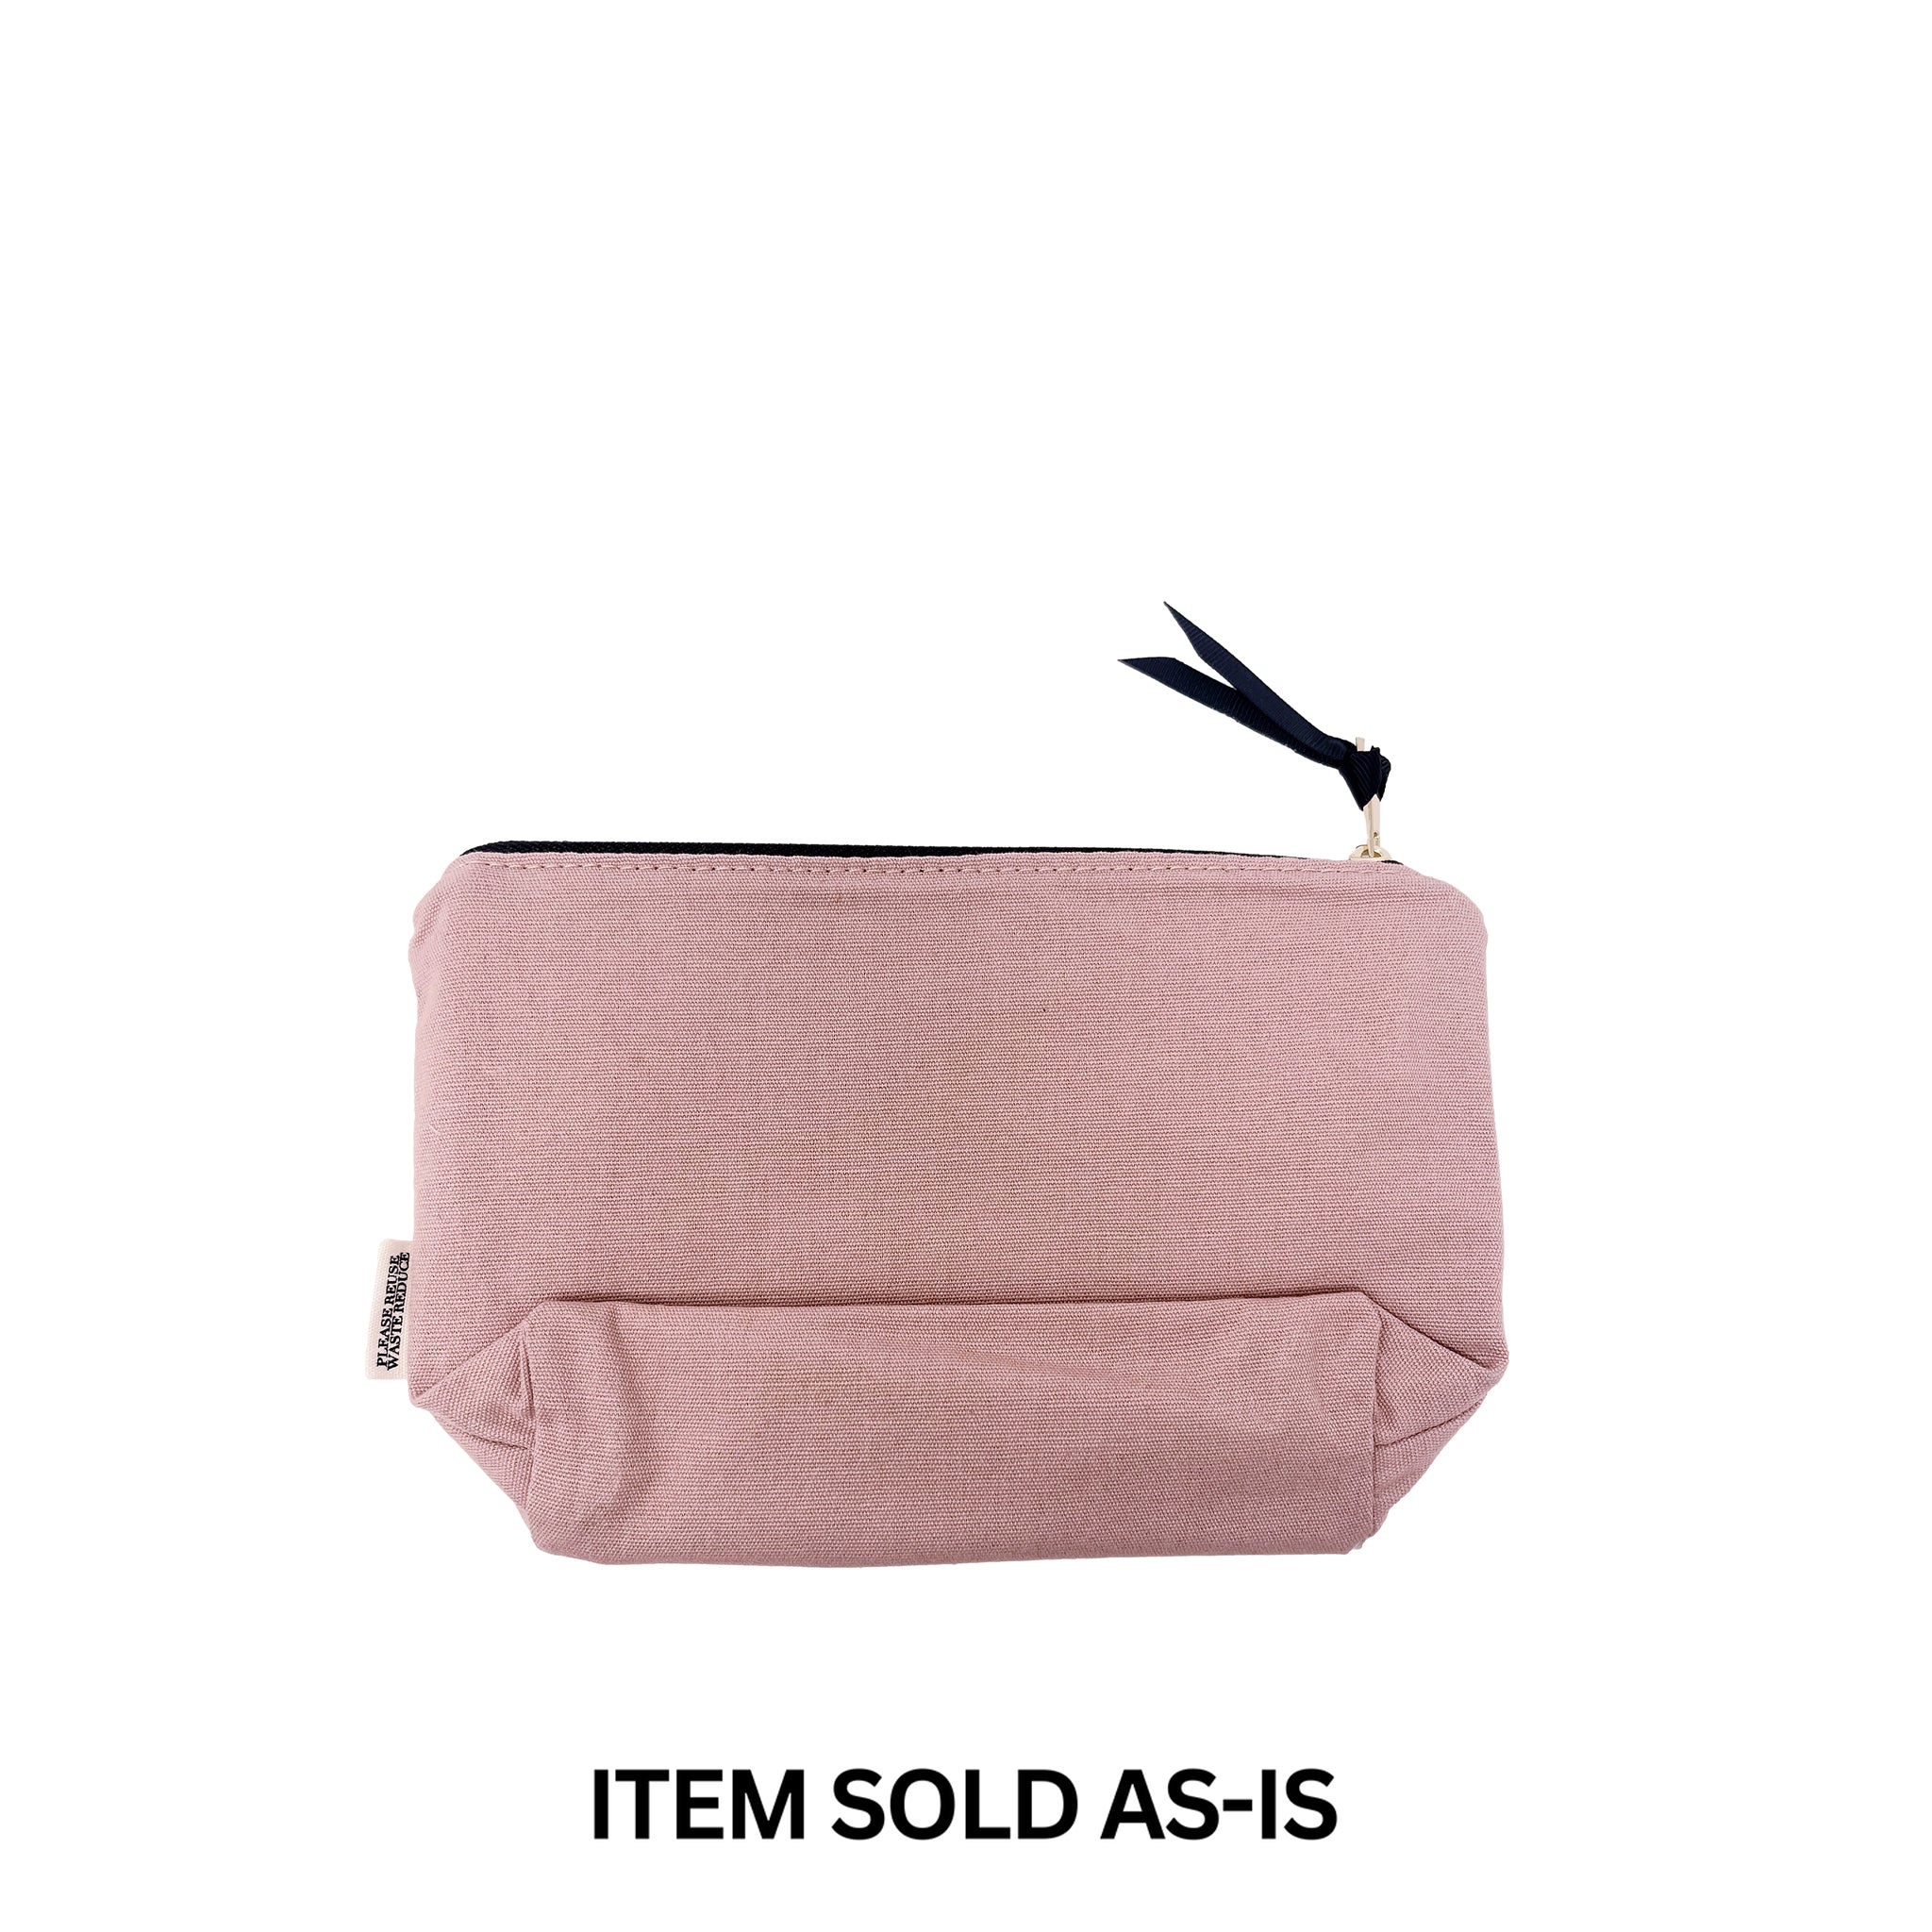 SALES BIN - My Makeup Pouch, Coated Lining Pink/Blush - Bag-all